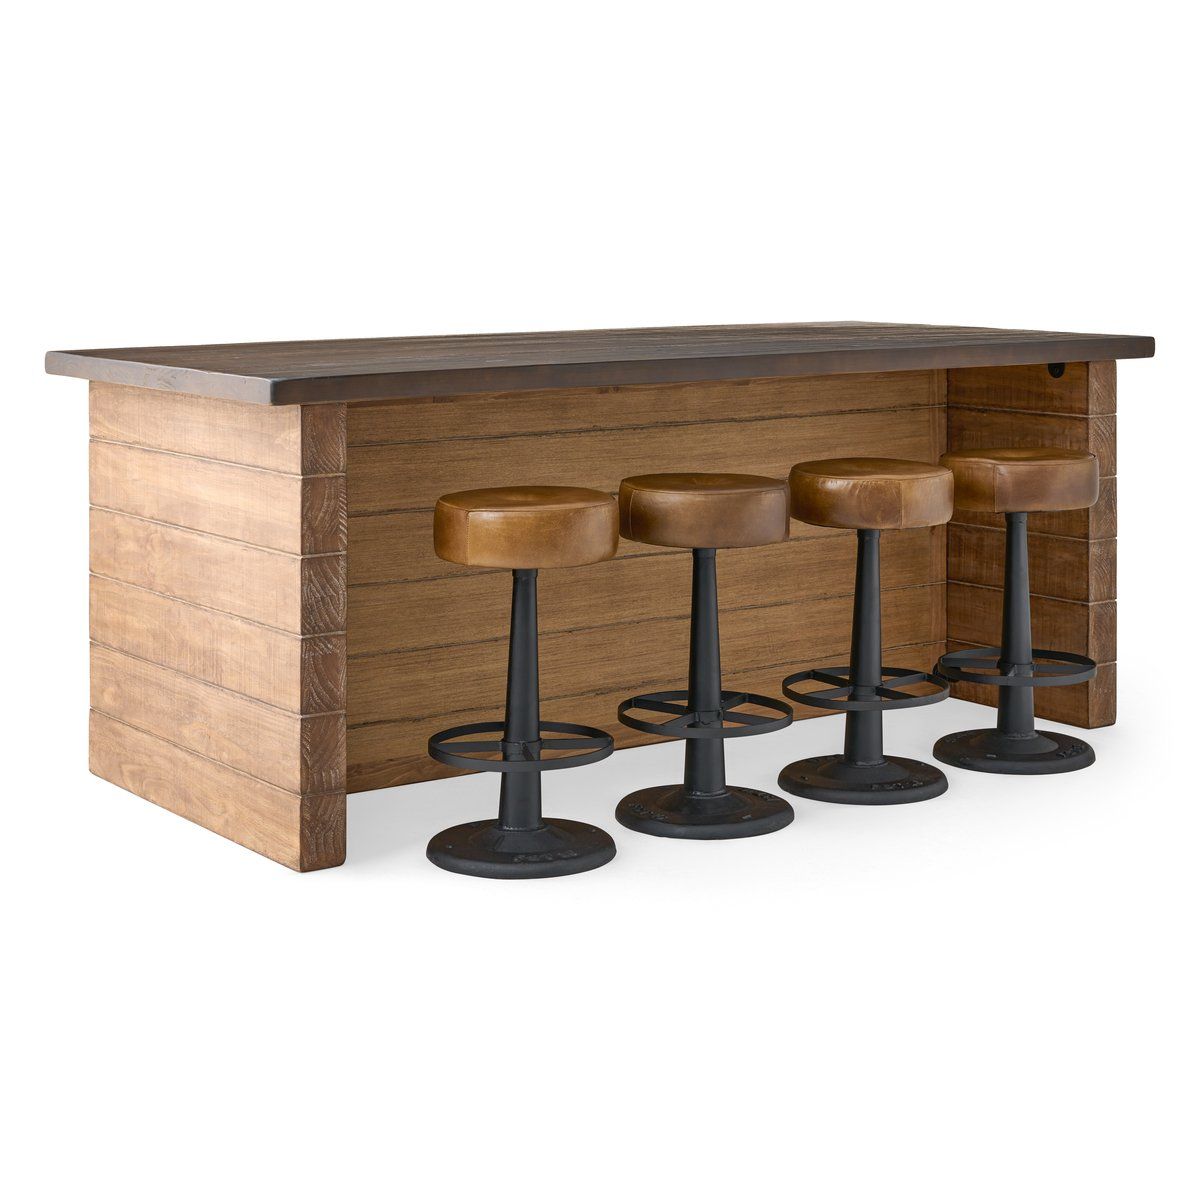 Marcus and Gavin 5pc Counter Set